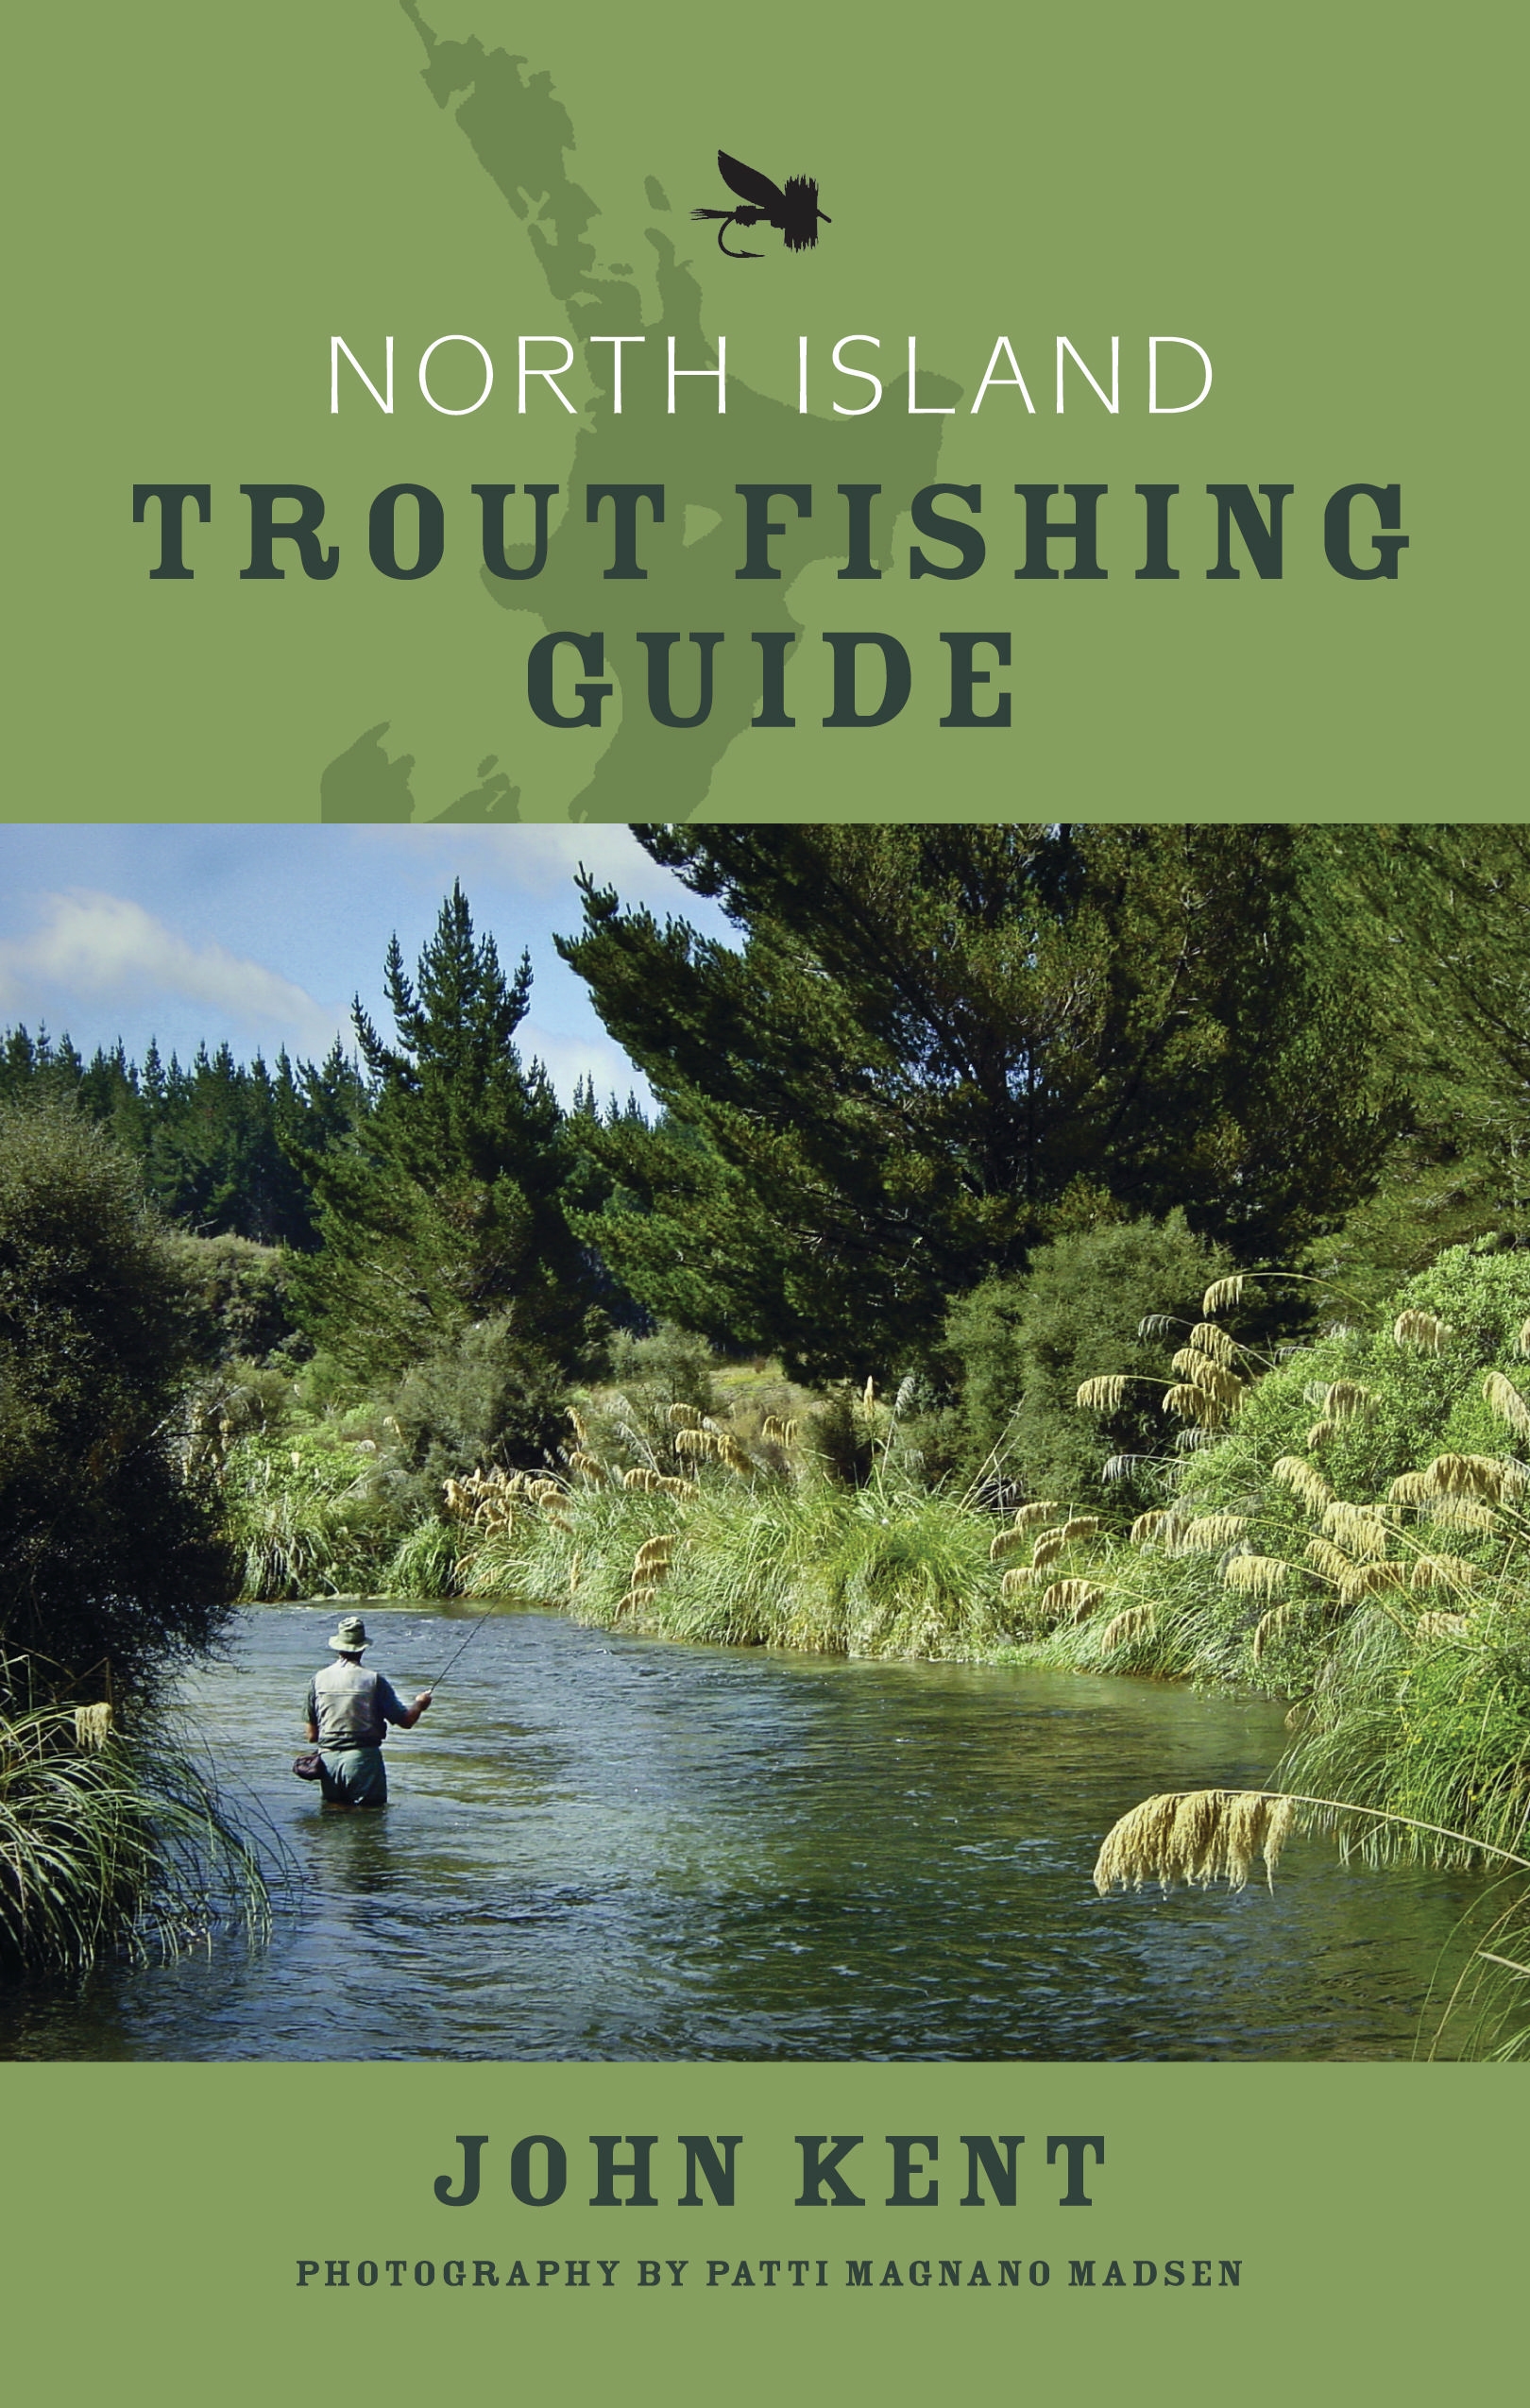 North Island Trout Fishing Guide by John Kent - Penguin Books New